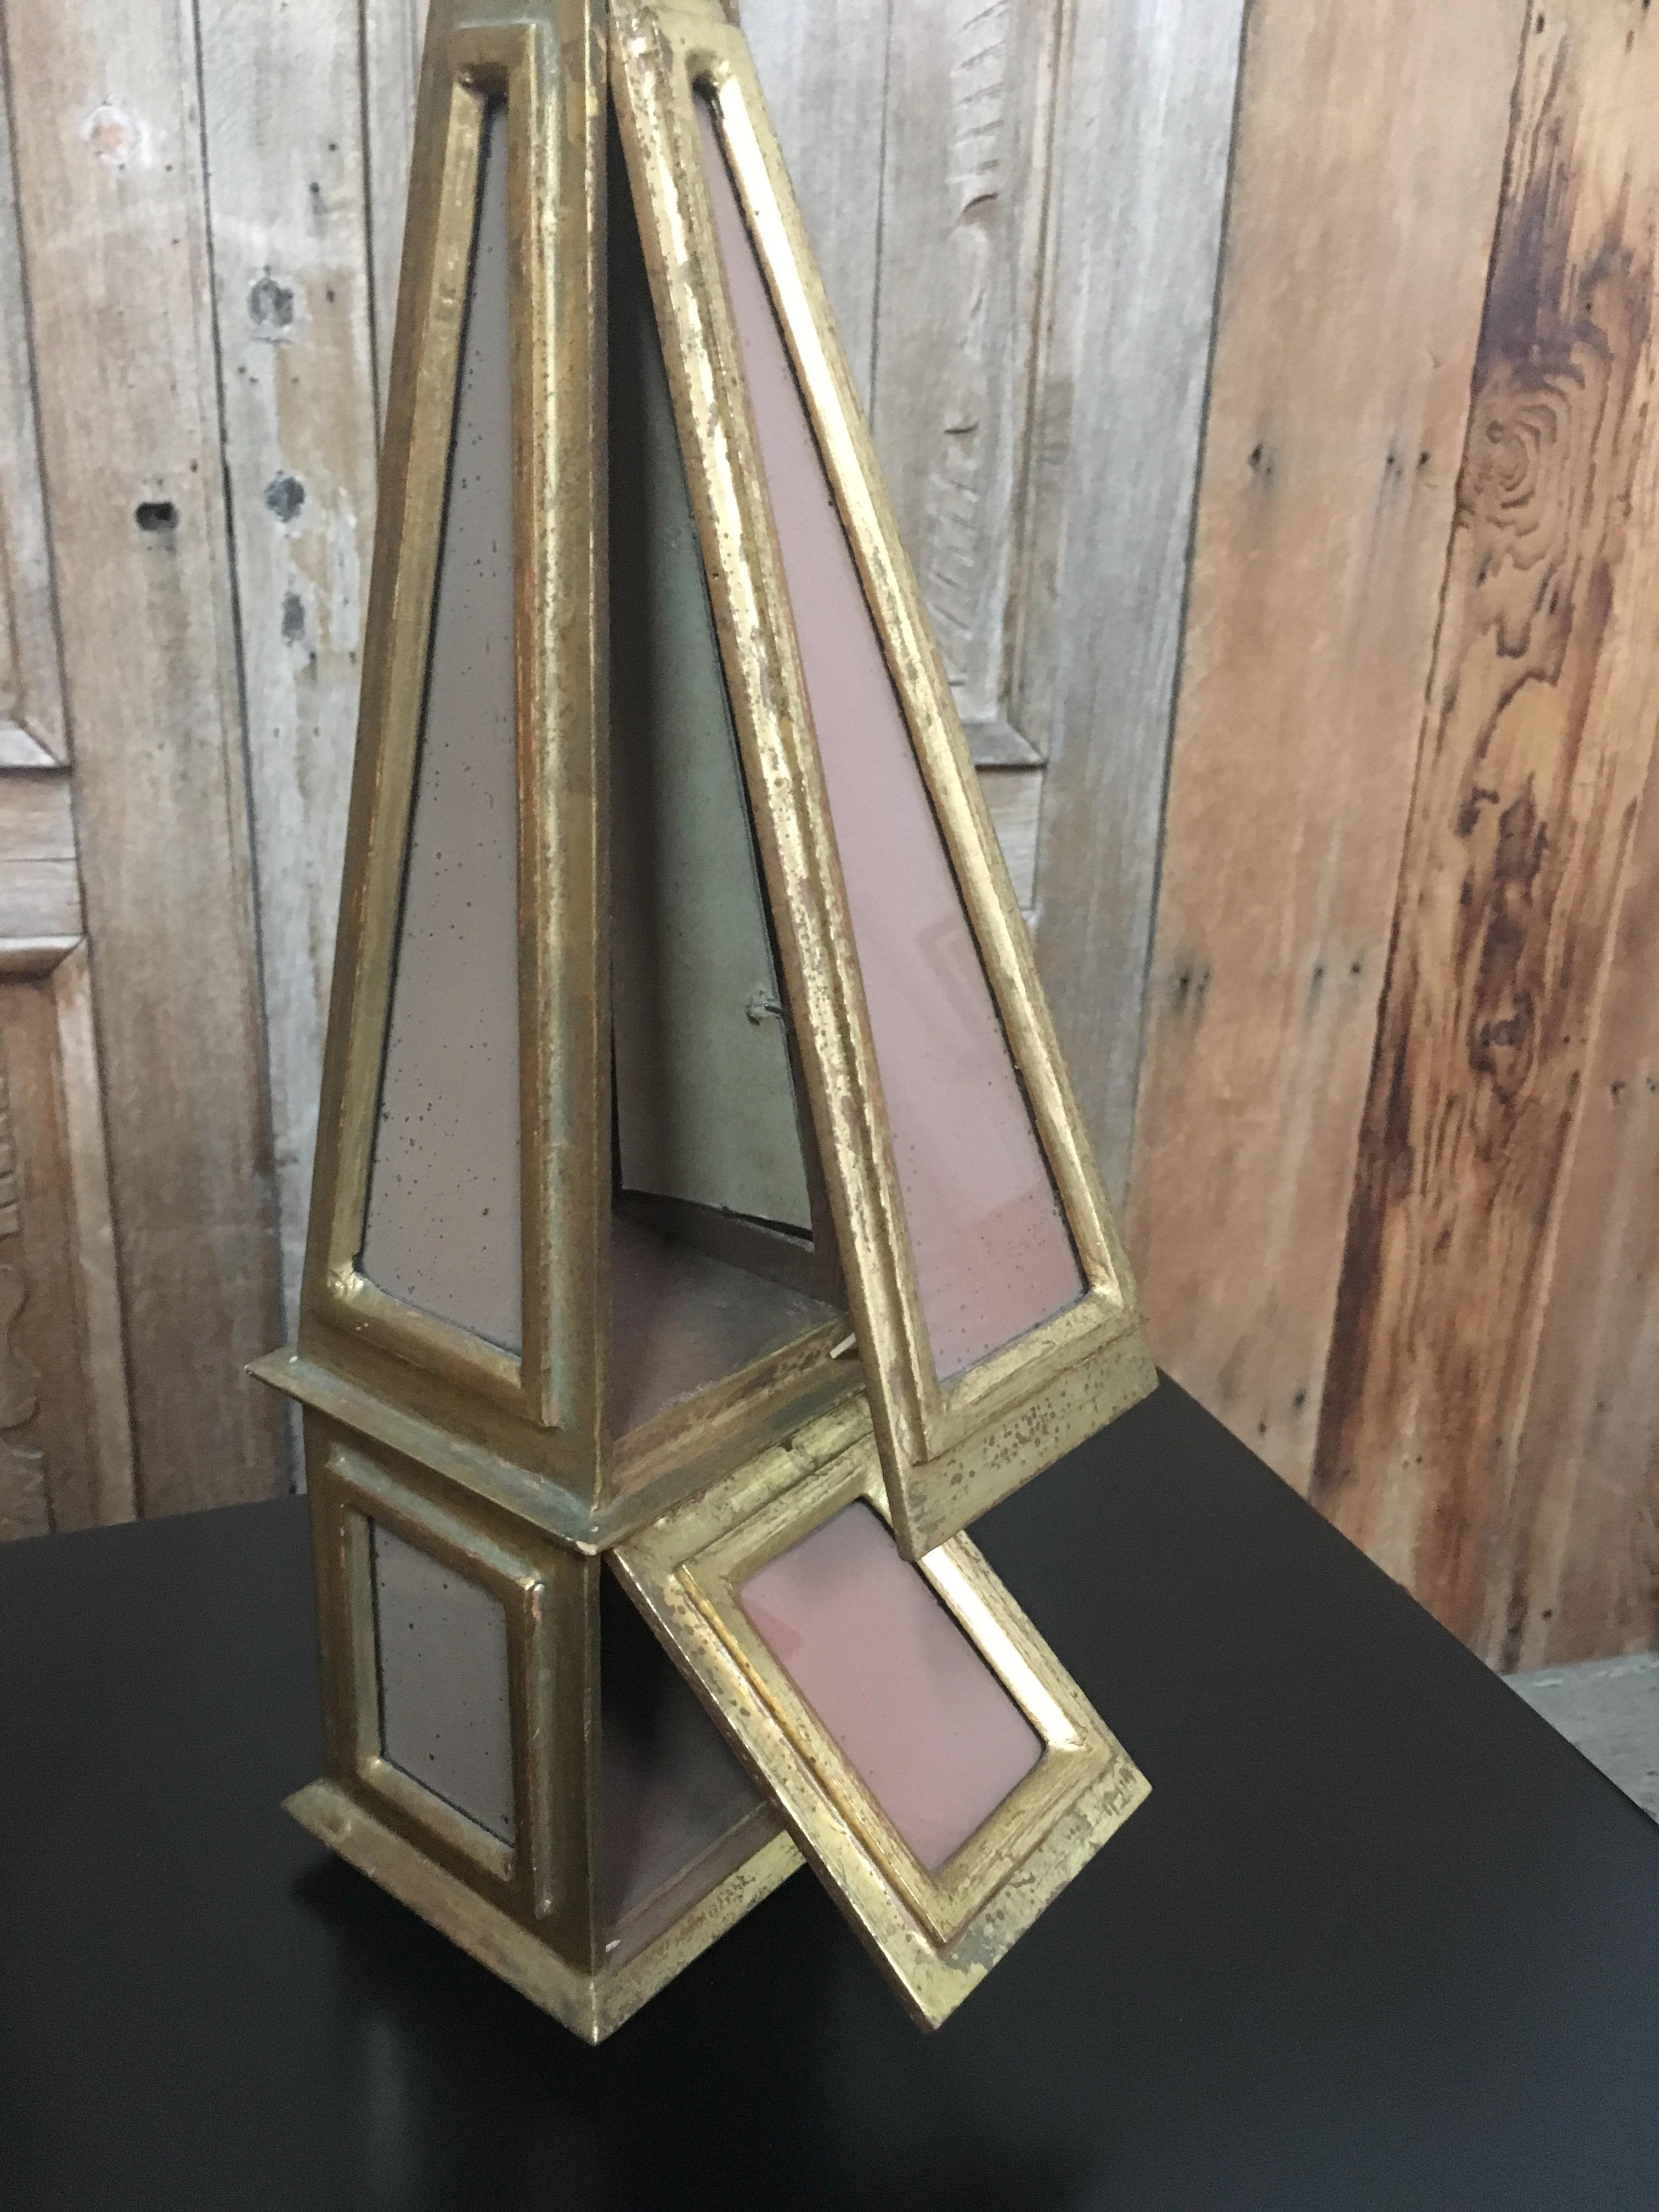 Pair of 1960s Italian obelisk handcrafted in Italy with a combination of giltwood and glass also a hidden compartment on each one made by Florentia.